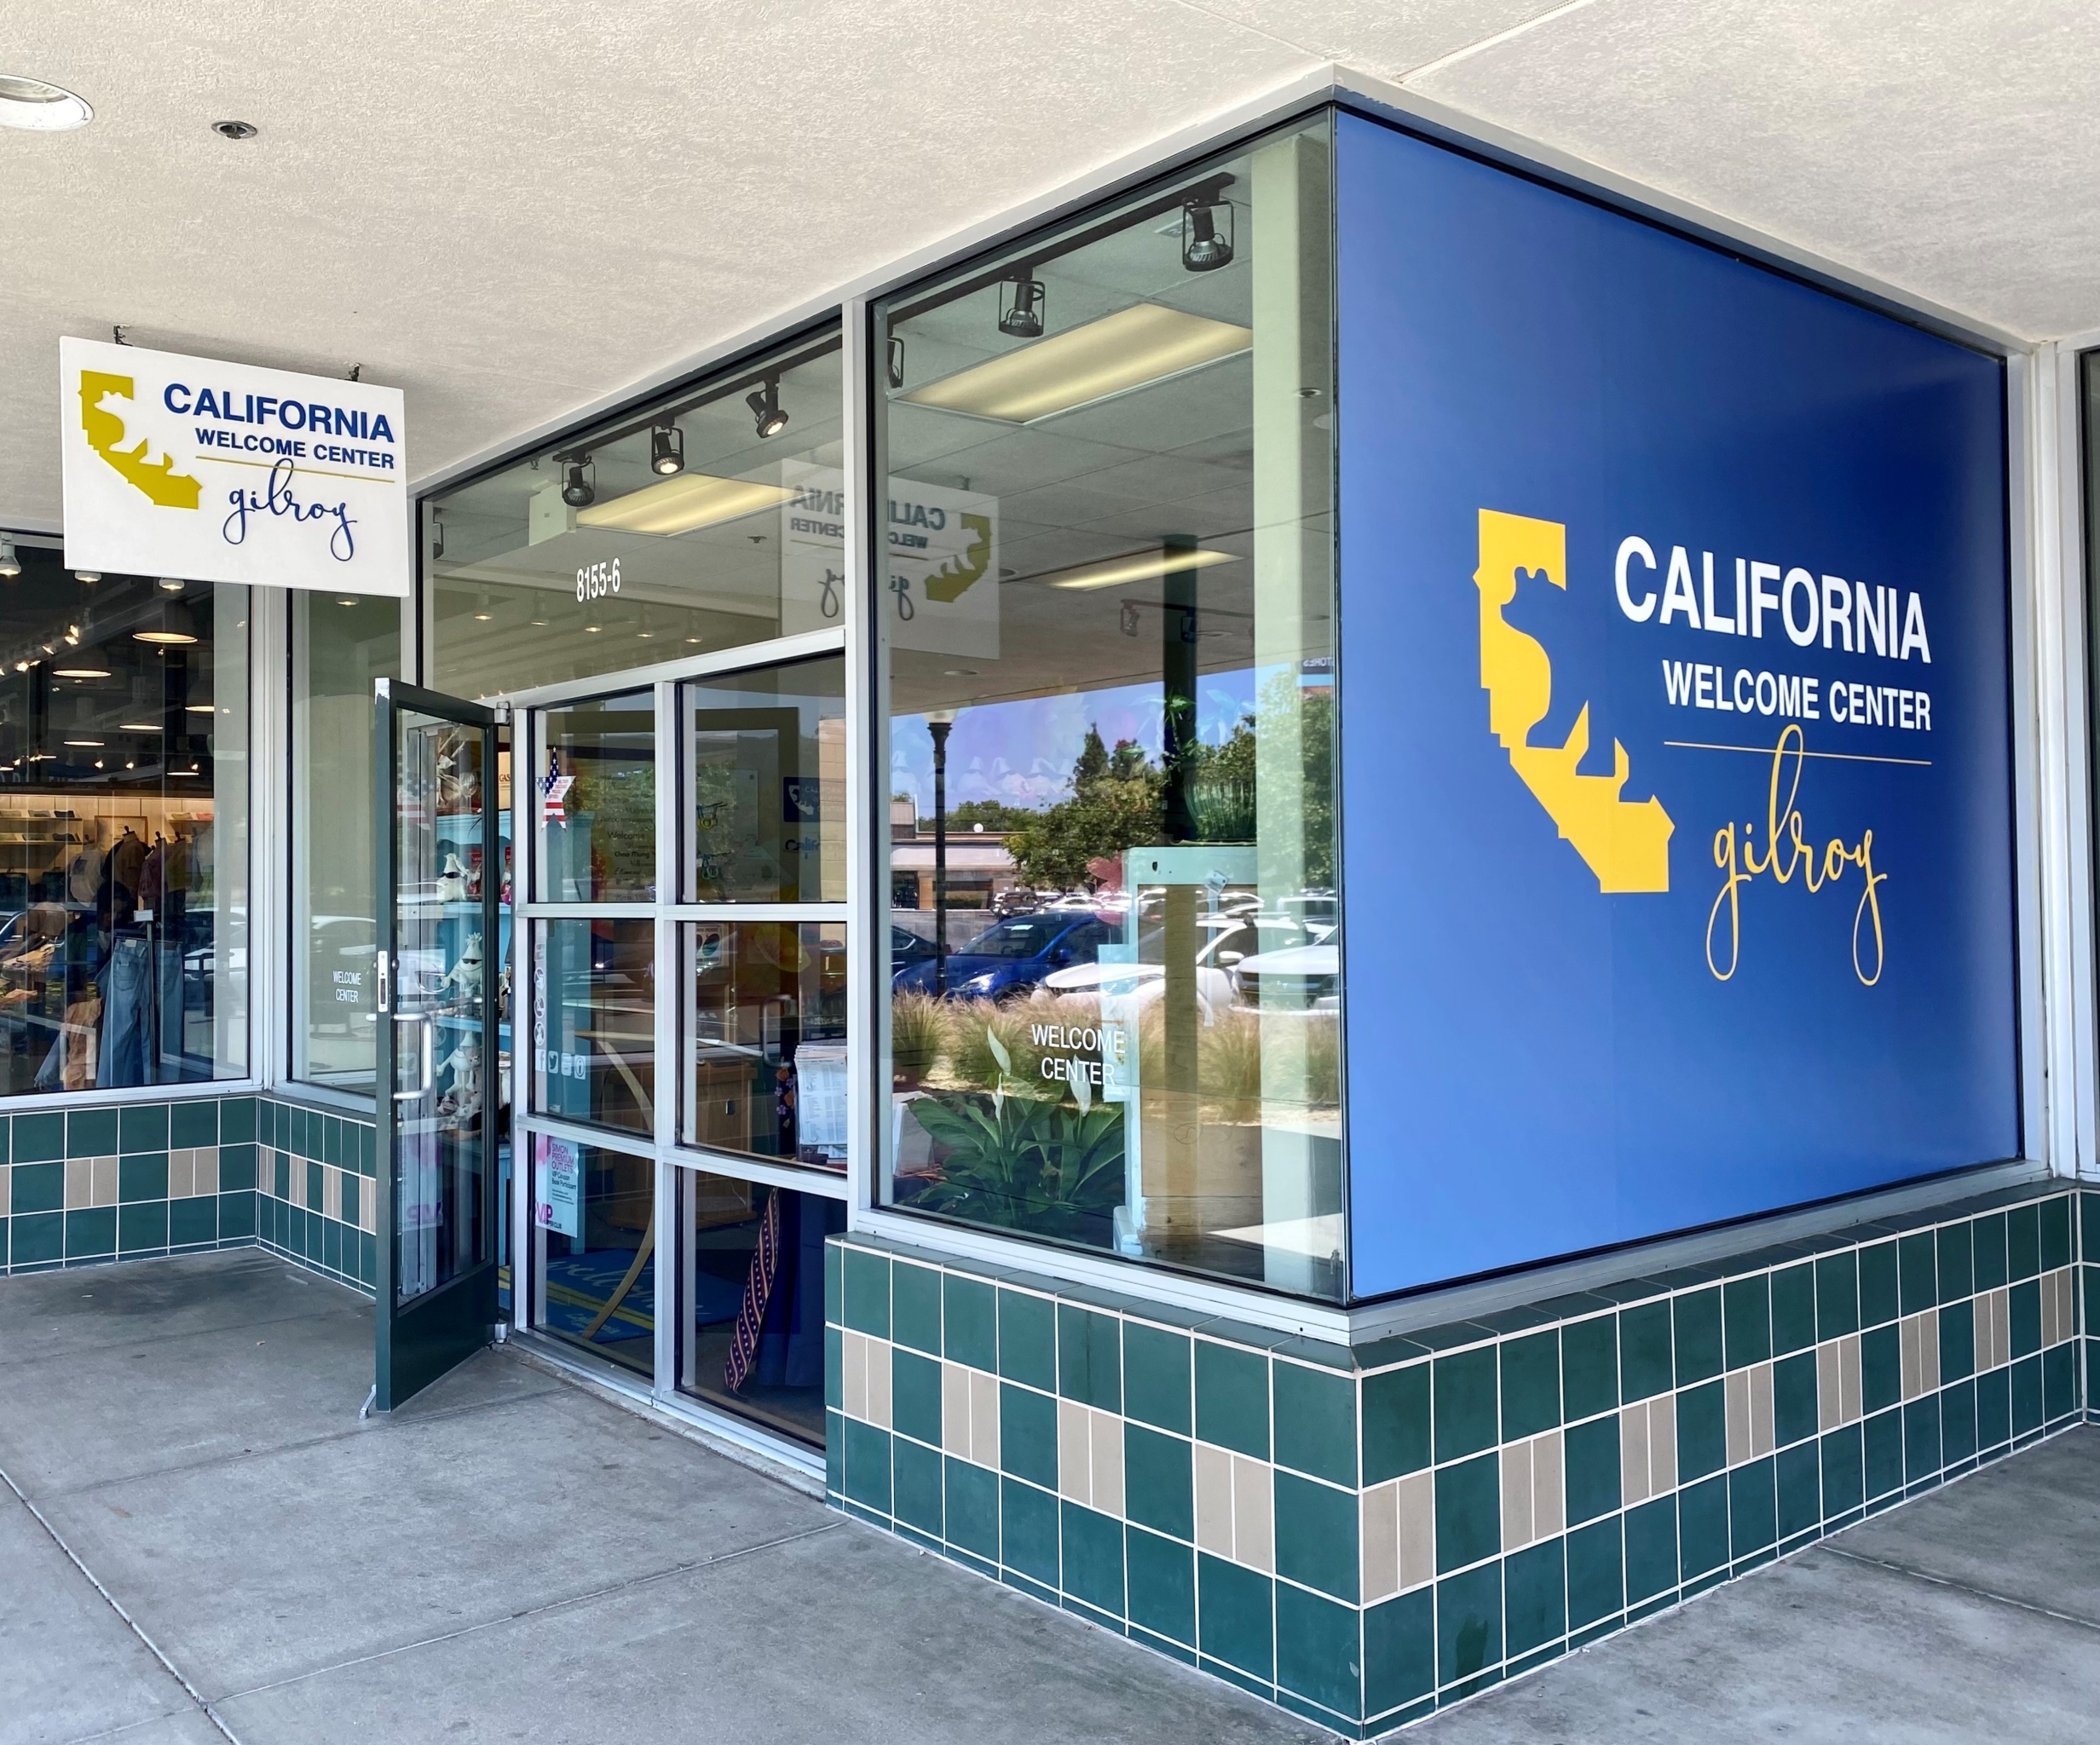 an exterior picture of the California Welcome Center with glass windows, green tiles along the bottom, and a blue vinyl cling on the right window